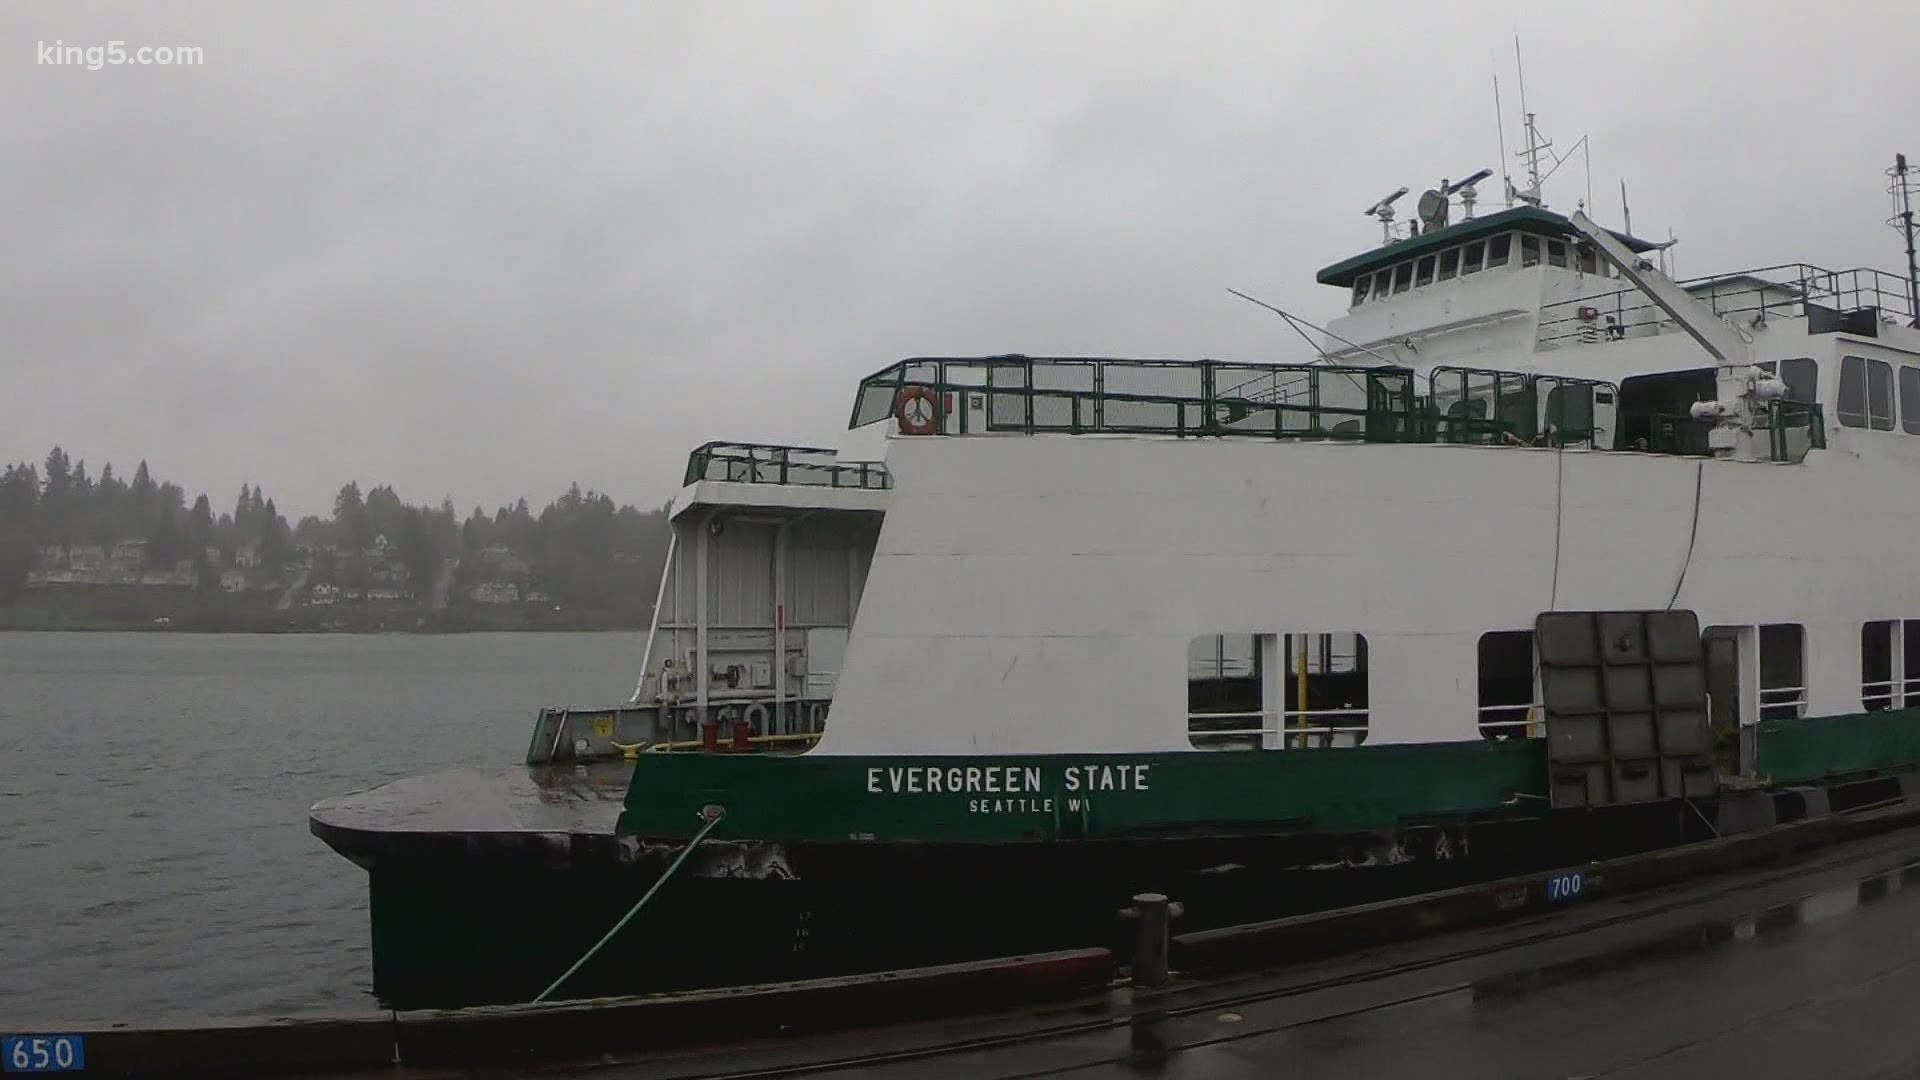 The Vancouver man who had the highest bid says he wants to preserve the ferry. He's exploring ways to convert solar panels on it.